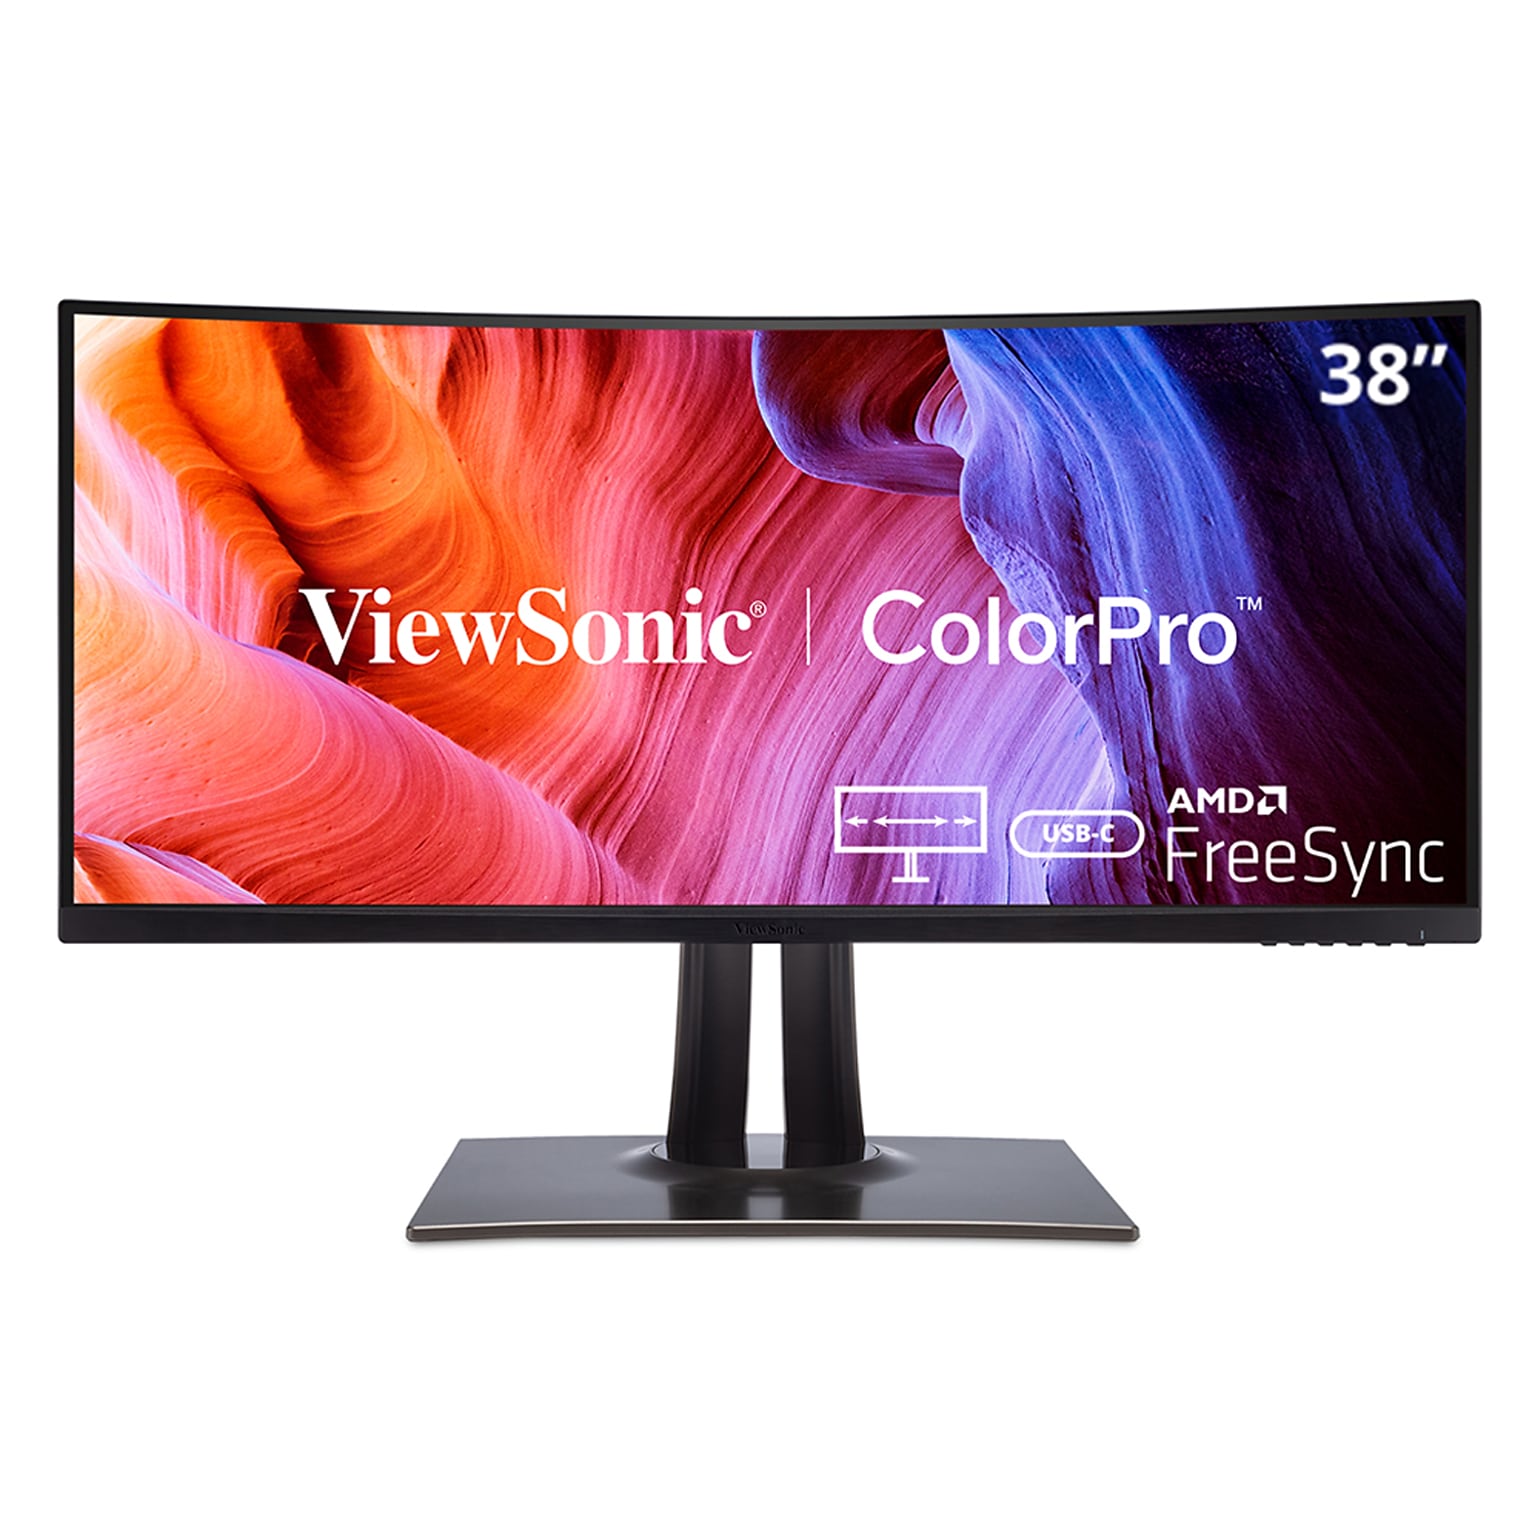 ViewSonic ColorPro 38 Curved 4K Ultra HD 60 Hz LED Gaming Monitor, Black (VP3881A)